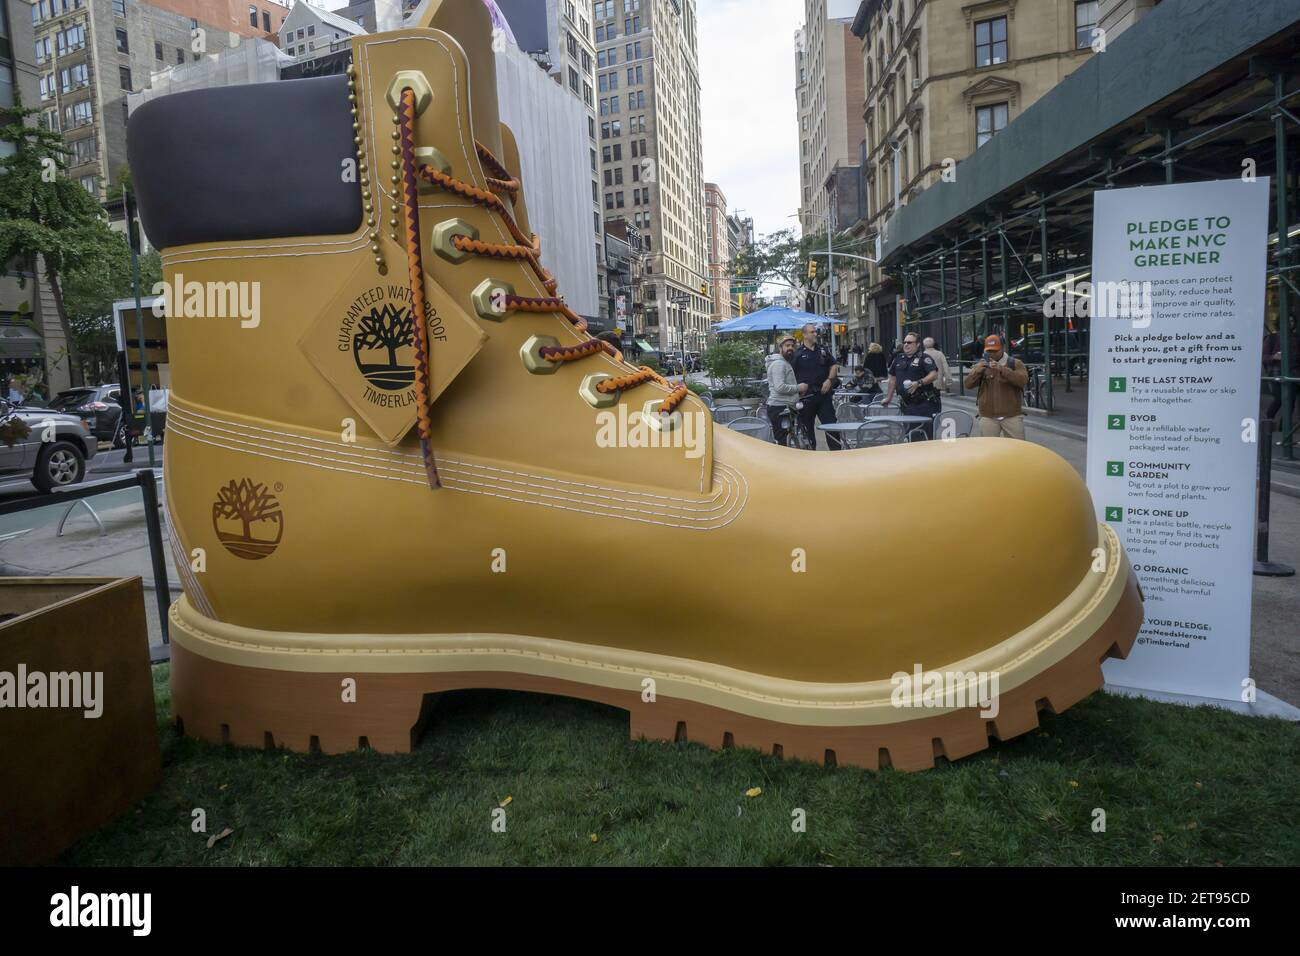 CORRECTION OF BRANDS OWNED BY VF CORP. A giant Timberland boot attracts visitors to Plaza in New York on Tuesday, October 16, 2018 where they can pot a free succulent at